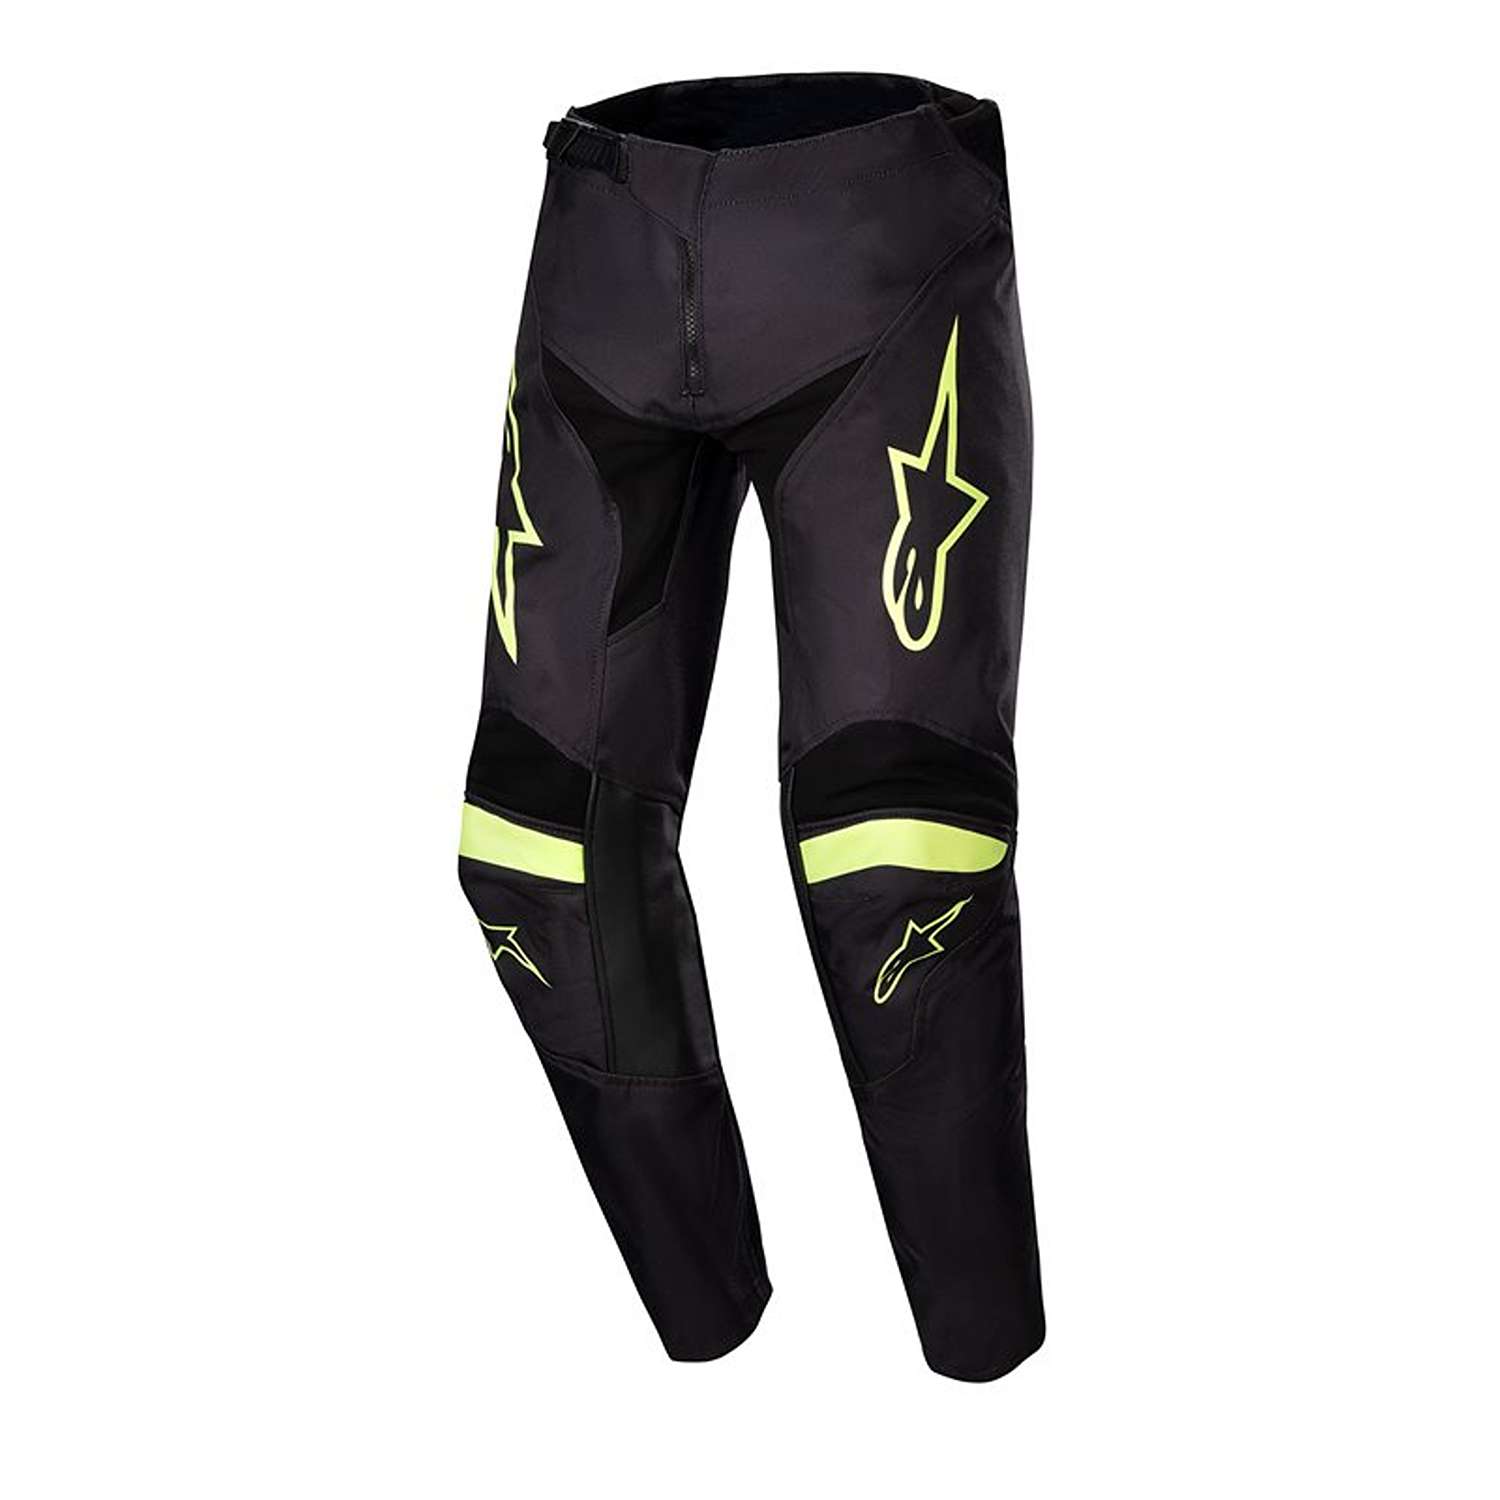 Image of Alpinestars Youth Racer Lurv Pants Black Yellow Fluo Taille 22